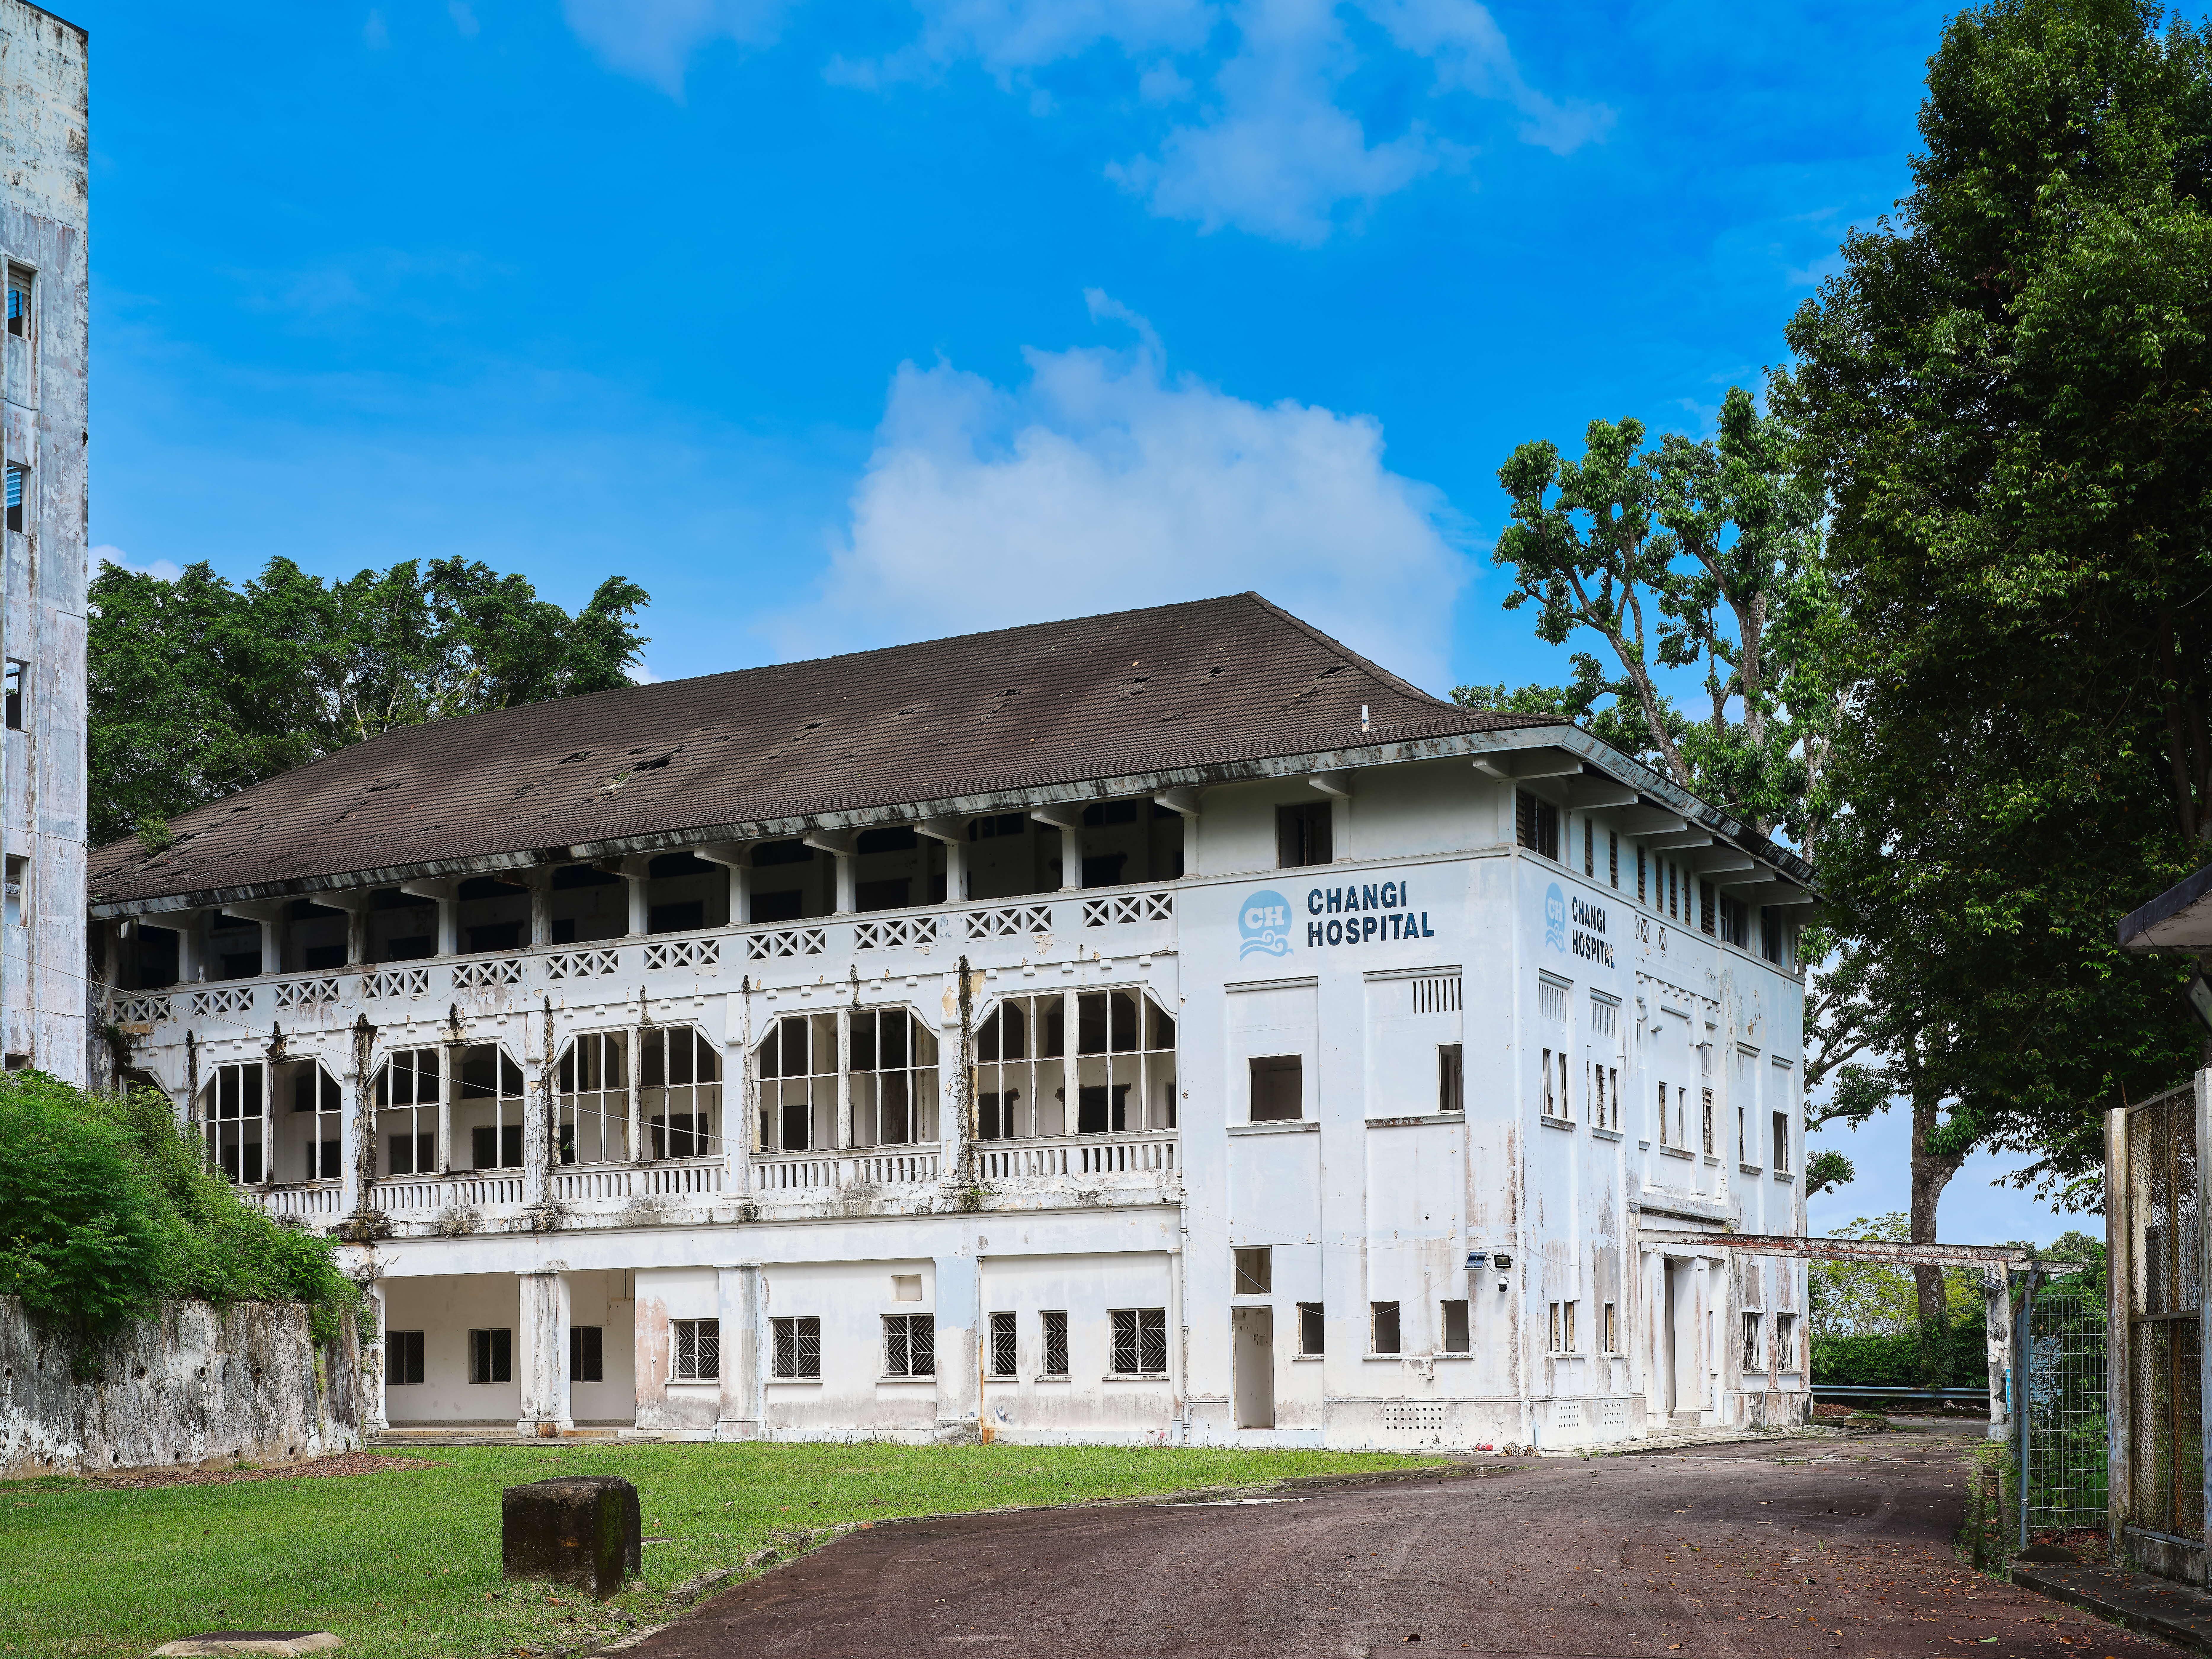 Located on the top of the hill, former Changi Hospital was completed in 1962 and served residents until 1997 when Changi Hospital was merged with Toa Payoh Hospital and relocated to Simei. 